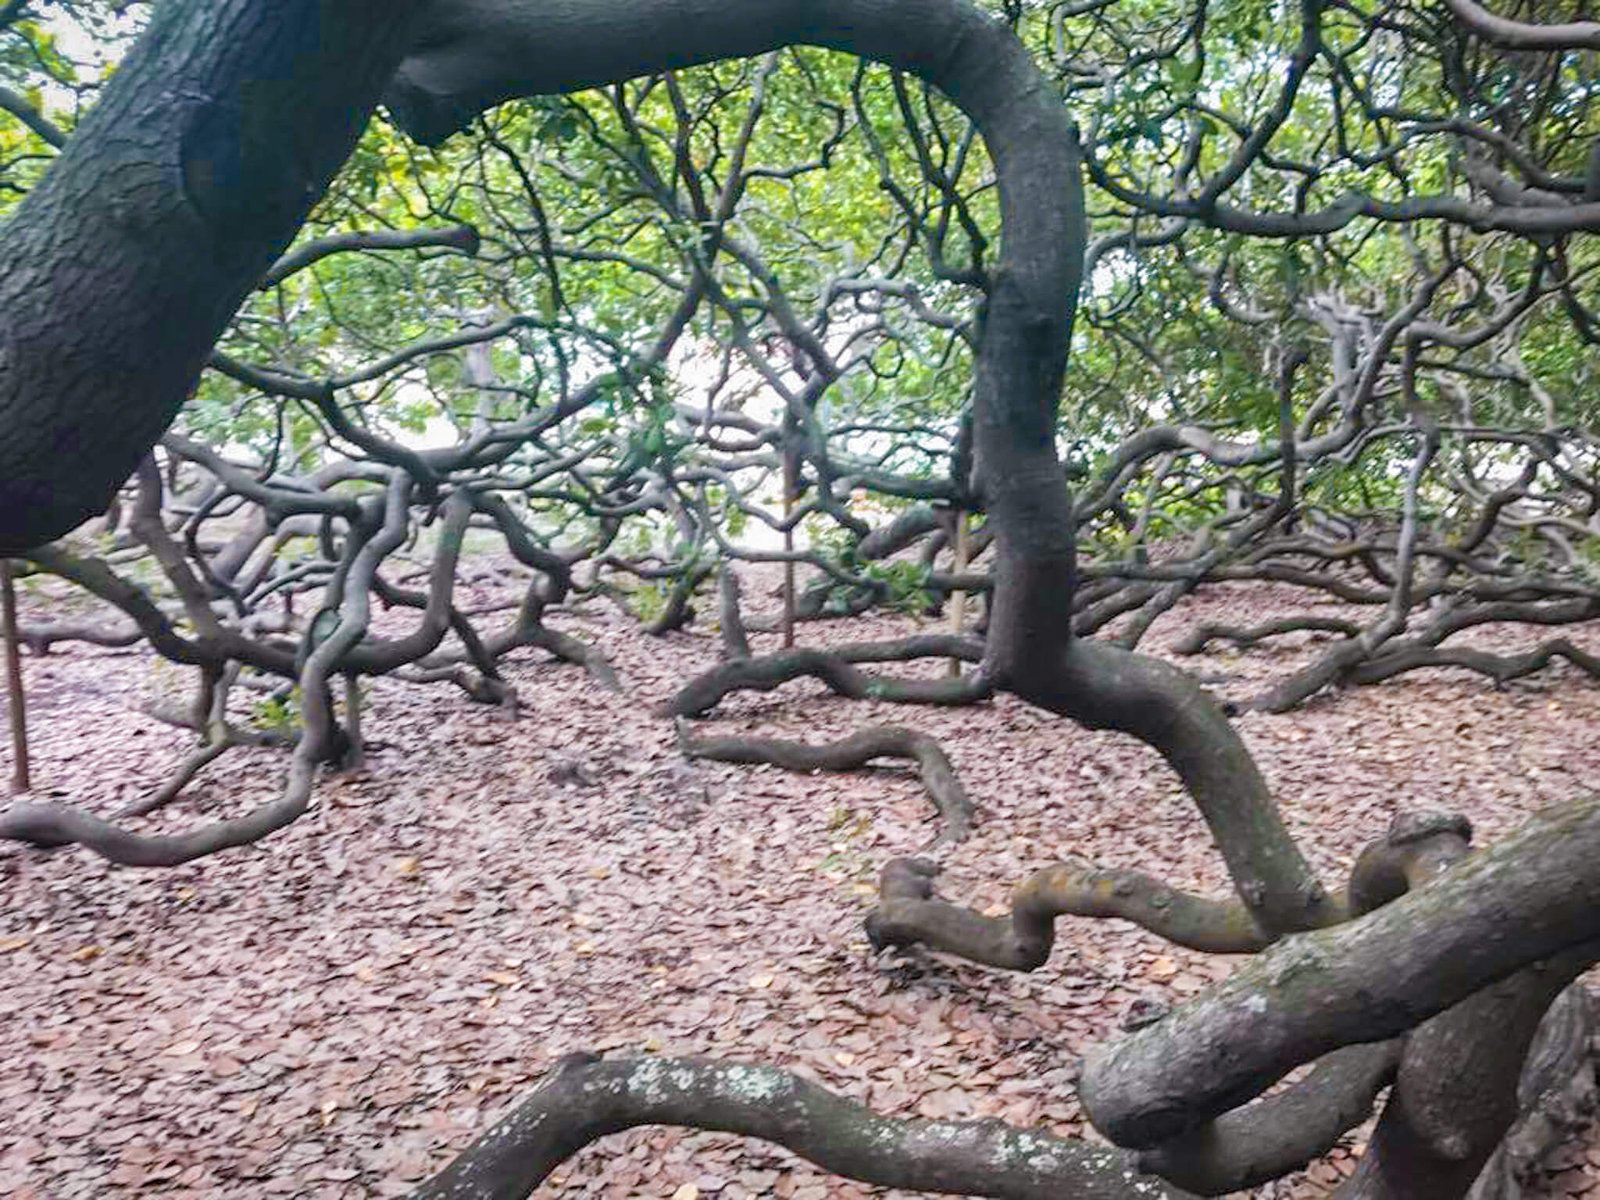 the world's biggest Cashew tree, things to do in Natal, Brazil